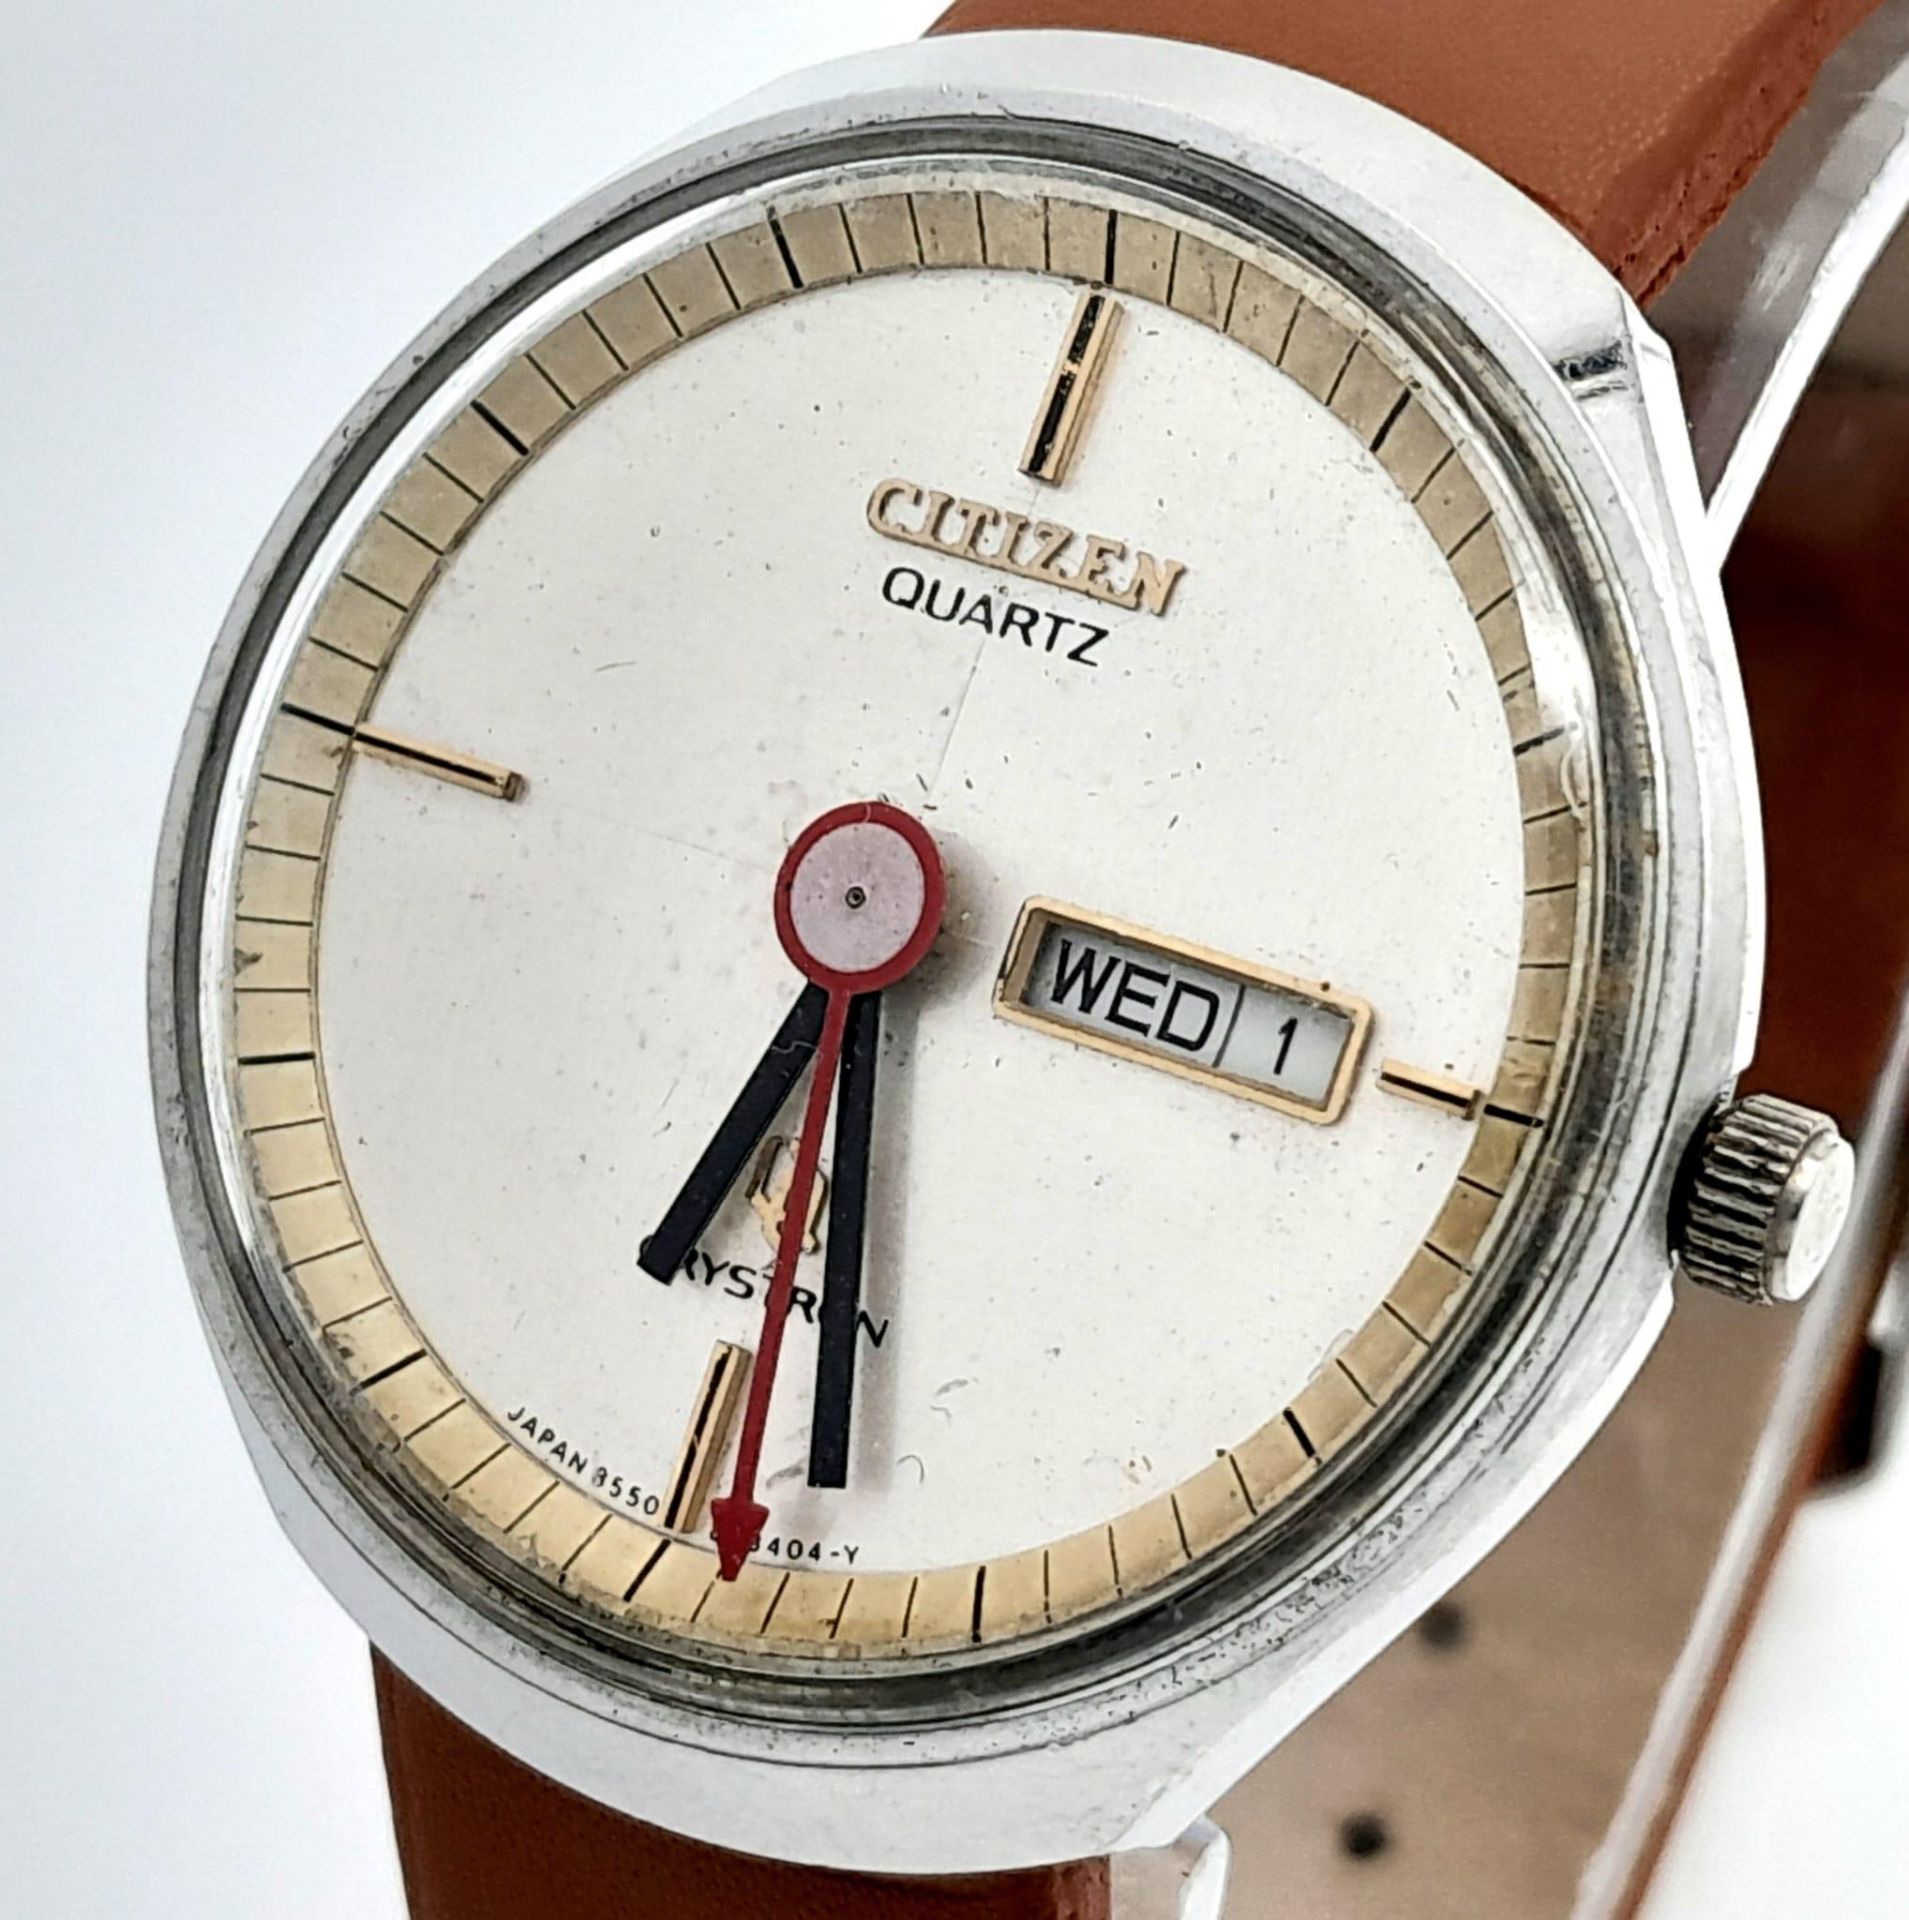 A Vintage Citizen Quartz Gents Watch. Brown leather strap. Stainless steel case - 36mm. Metallic - Image 3 of 7